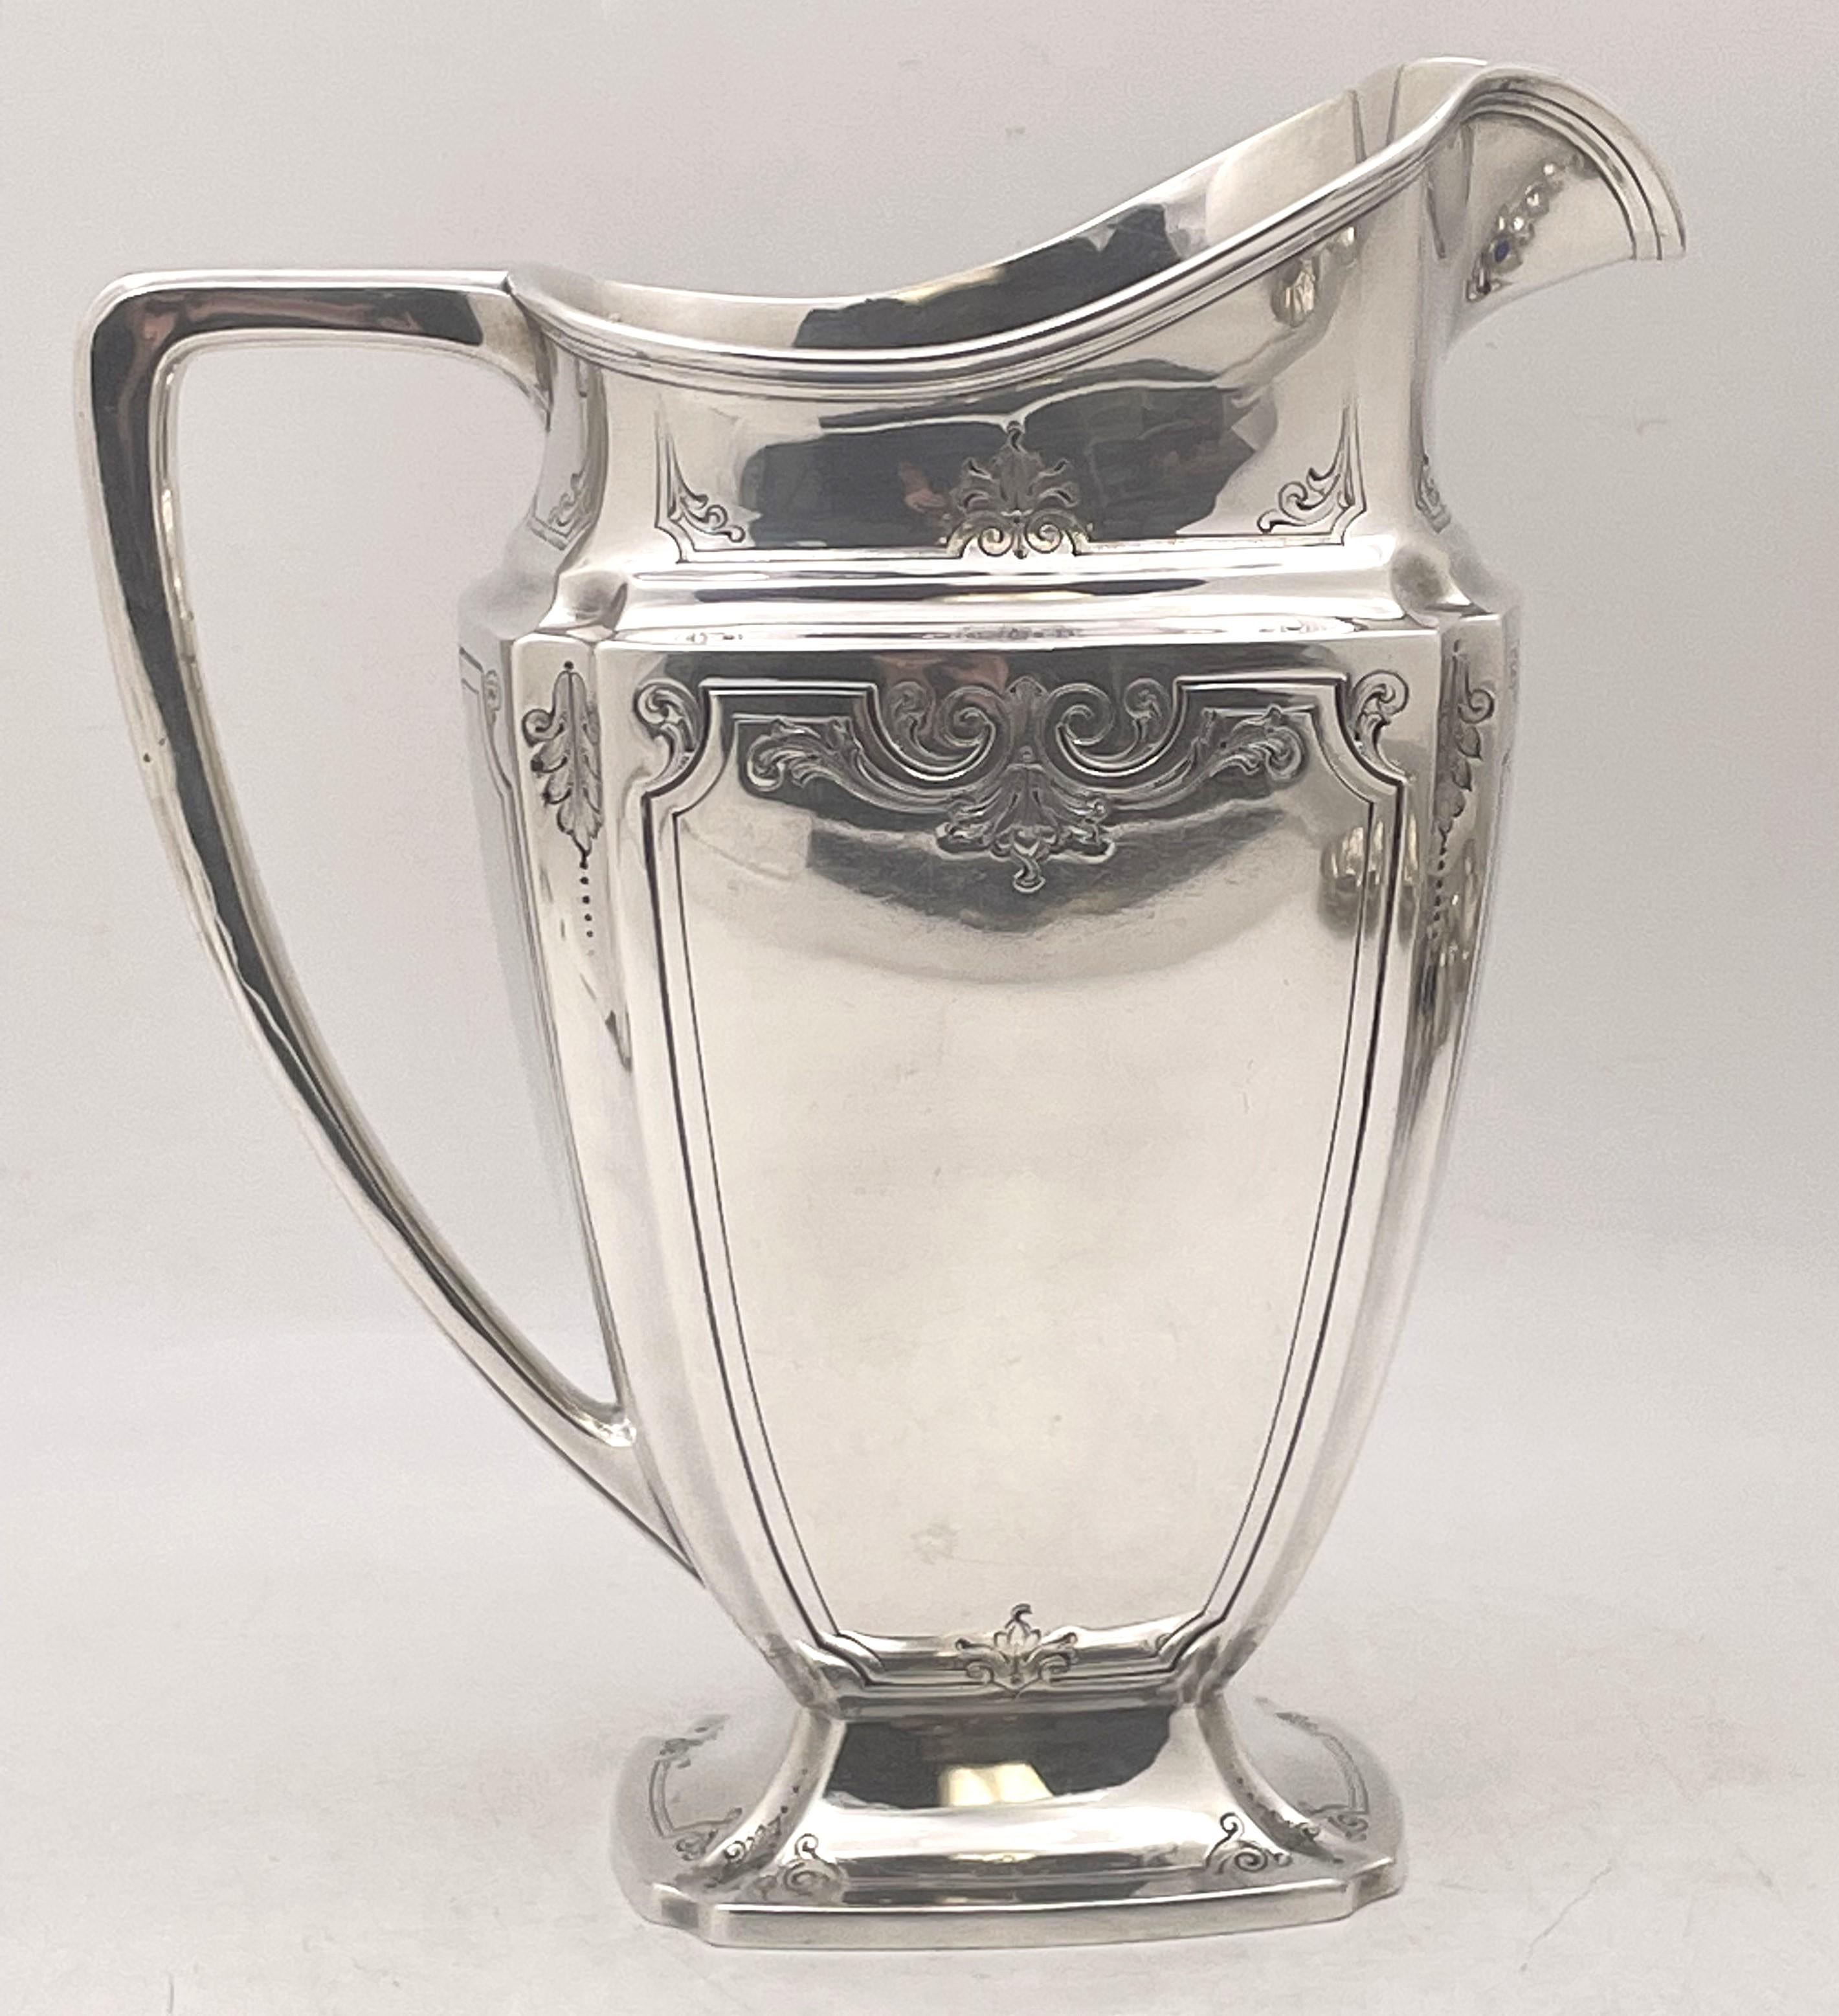 Whiting sterling silver bar pitcher from the late 19th or early 20th century, beautifully adorned with natural geometric motifs on the body and base, with a volume of 5 pints. It measures 10 1/4'' in height by 9 1/8'' from handle to spout by 4 3/4''